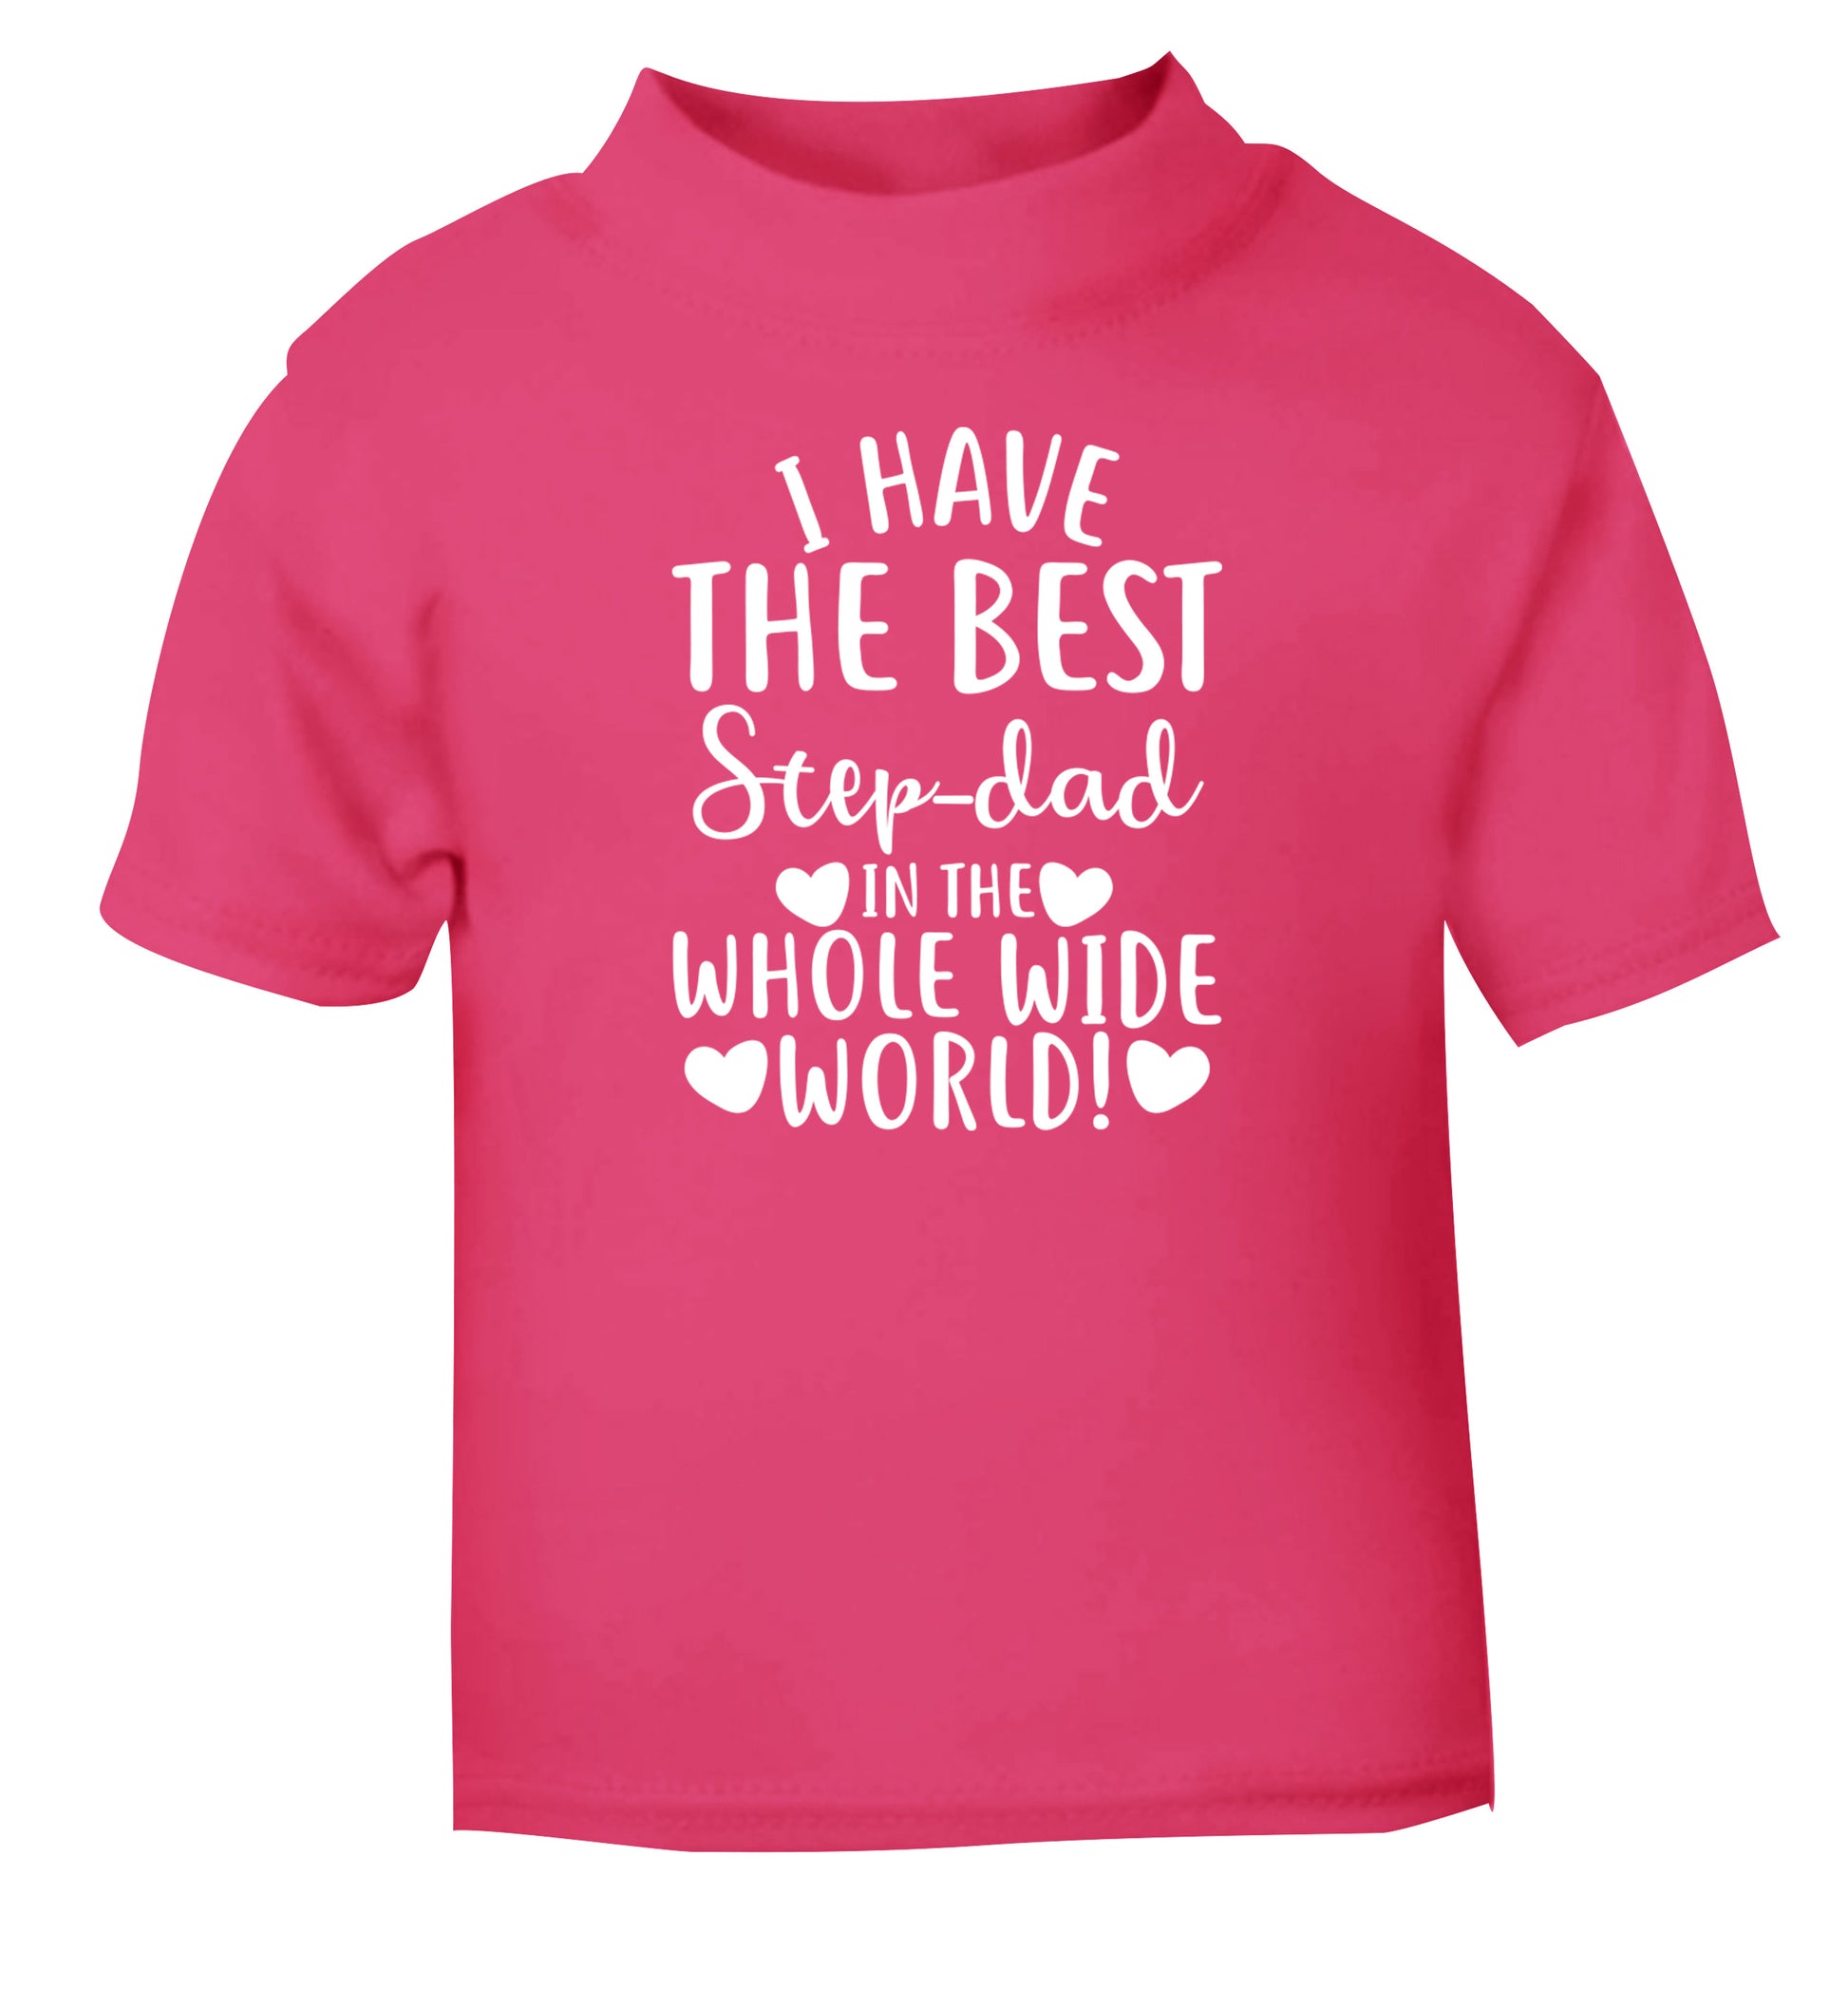 I have the best step-dad in the whole wide world! pink Baby Toddler Tshirt 2 Years